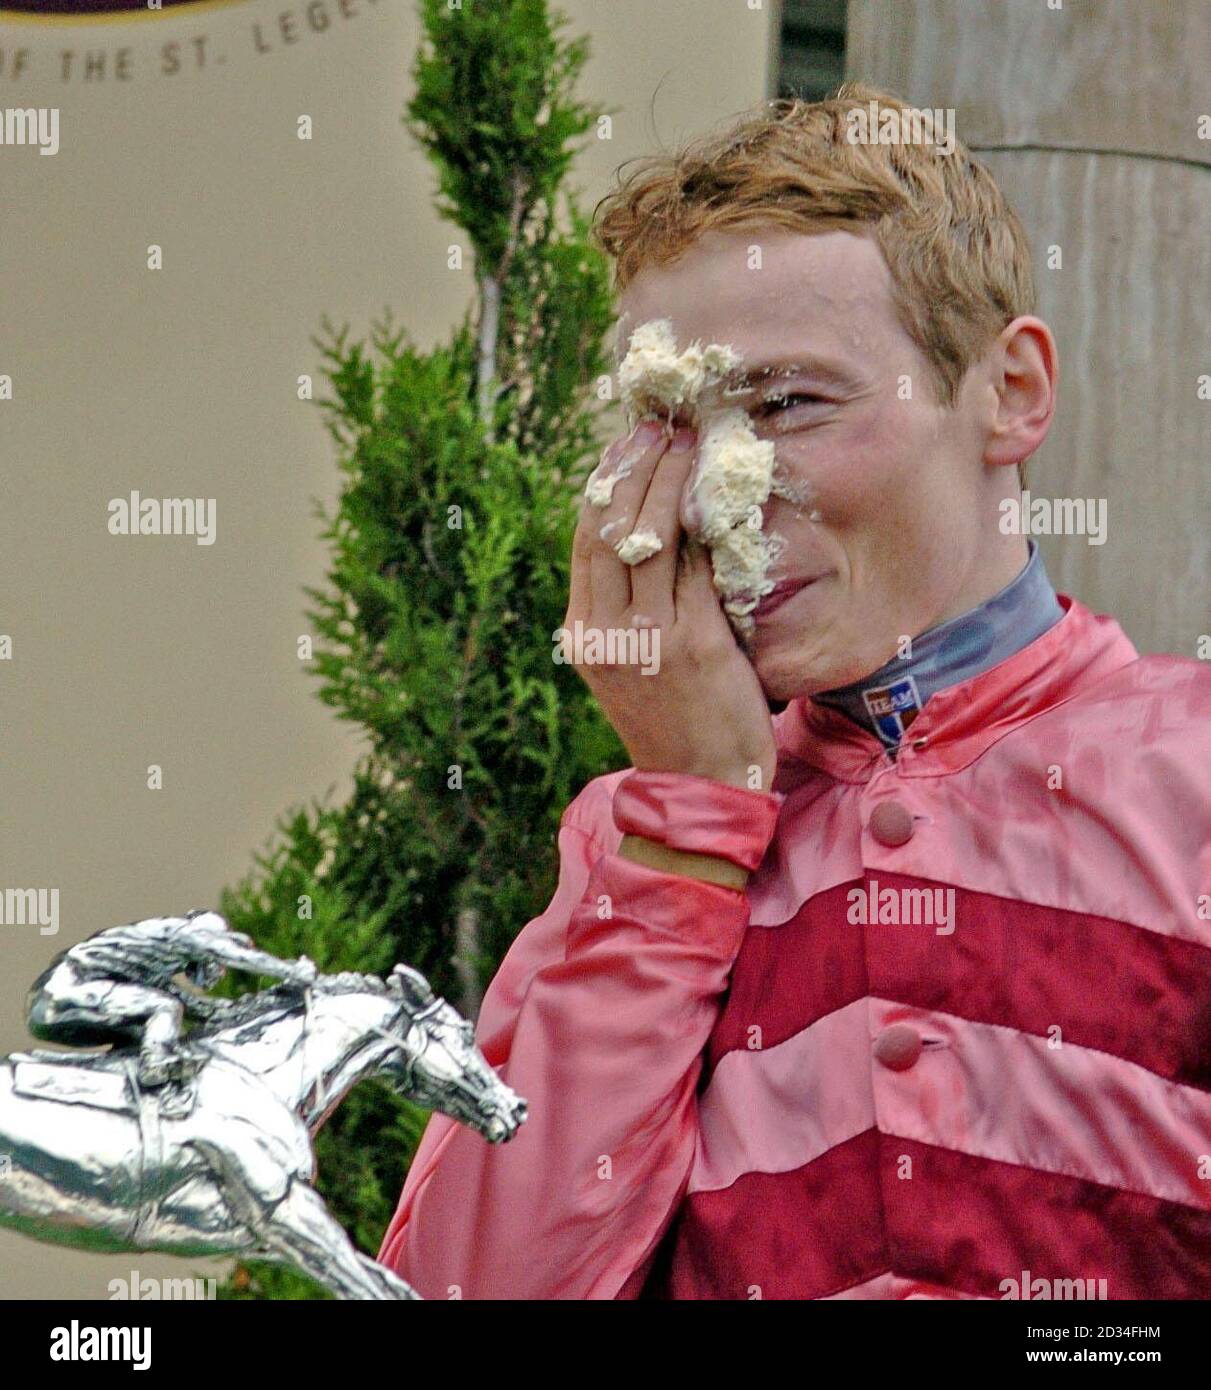 2005's Champion jockey Jamie Spencer wipes cream from his eyes after fellow jockey Tony Culhane surprised him with a cake in his face at Doncaster Saturday November 5, PRESS ASSOCIATION